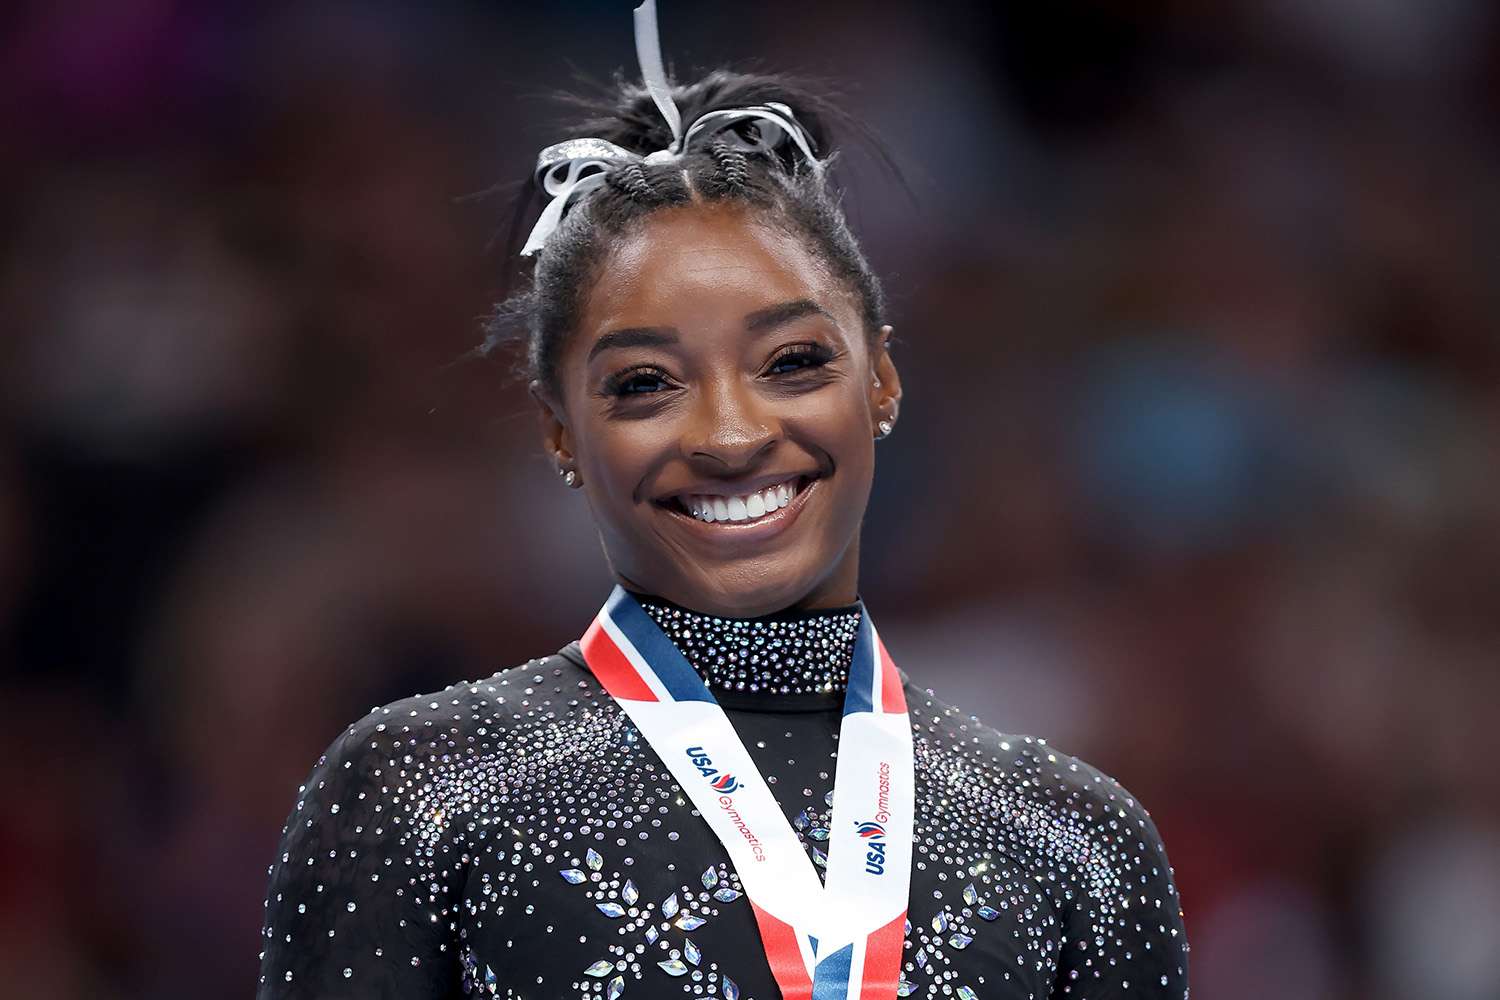 Simone Biles Wins Ninth National Title, Paves Way for Future Champions